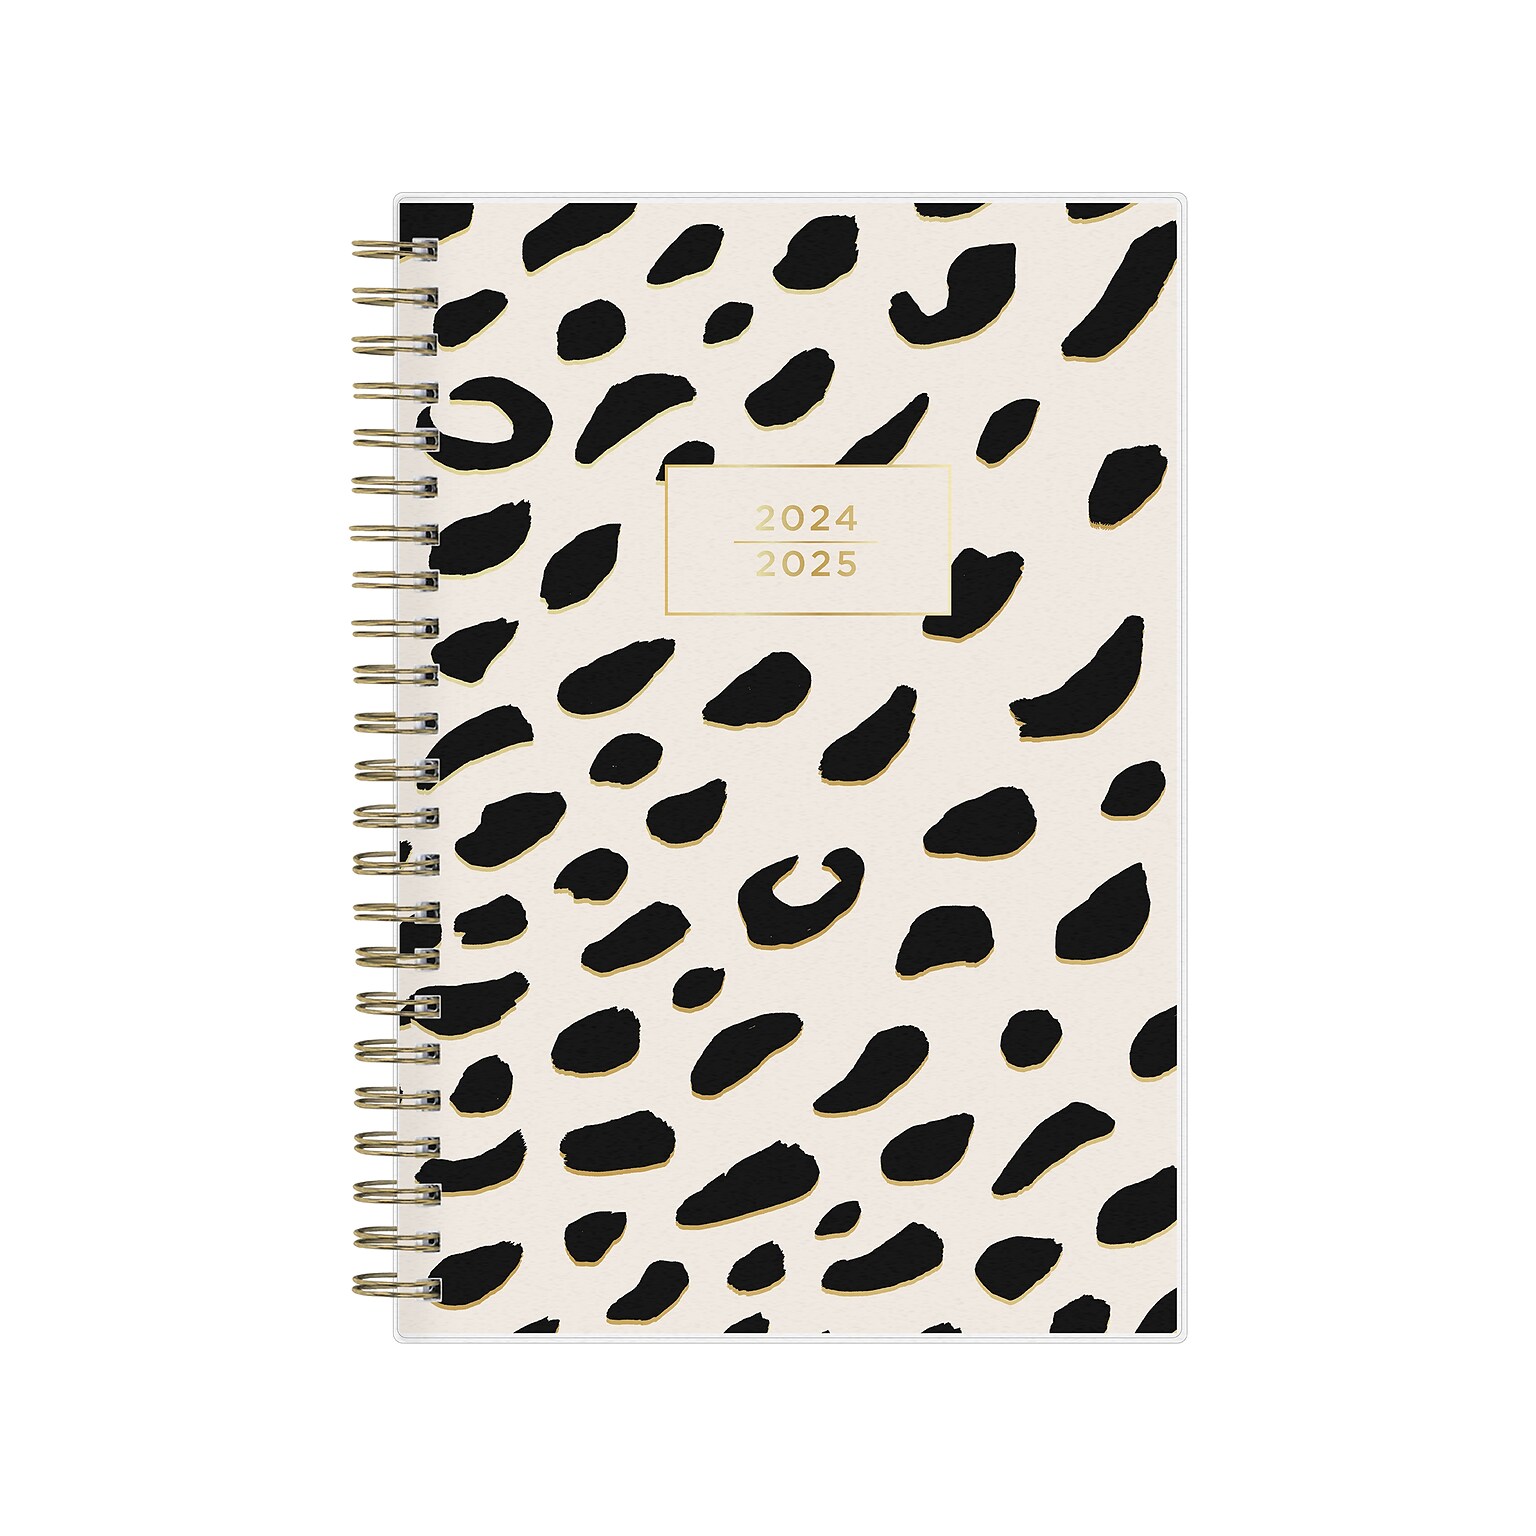 2024-2025 Blue Sky Leopard Black 5 x 8 Academic Weekly & Monthly Planner, Plastic Cover, Black/White (149047-A25)